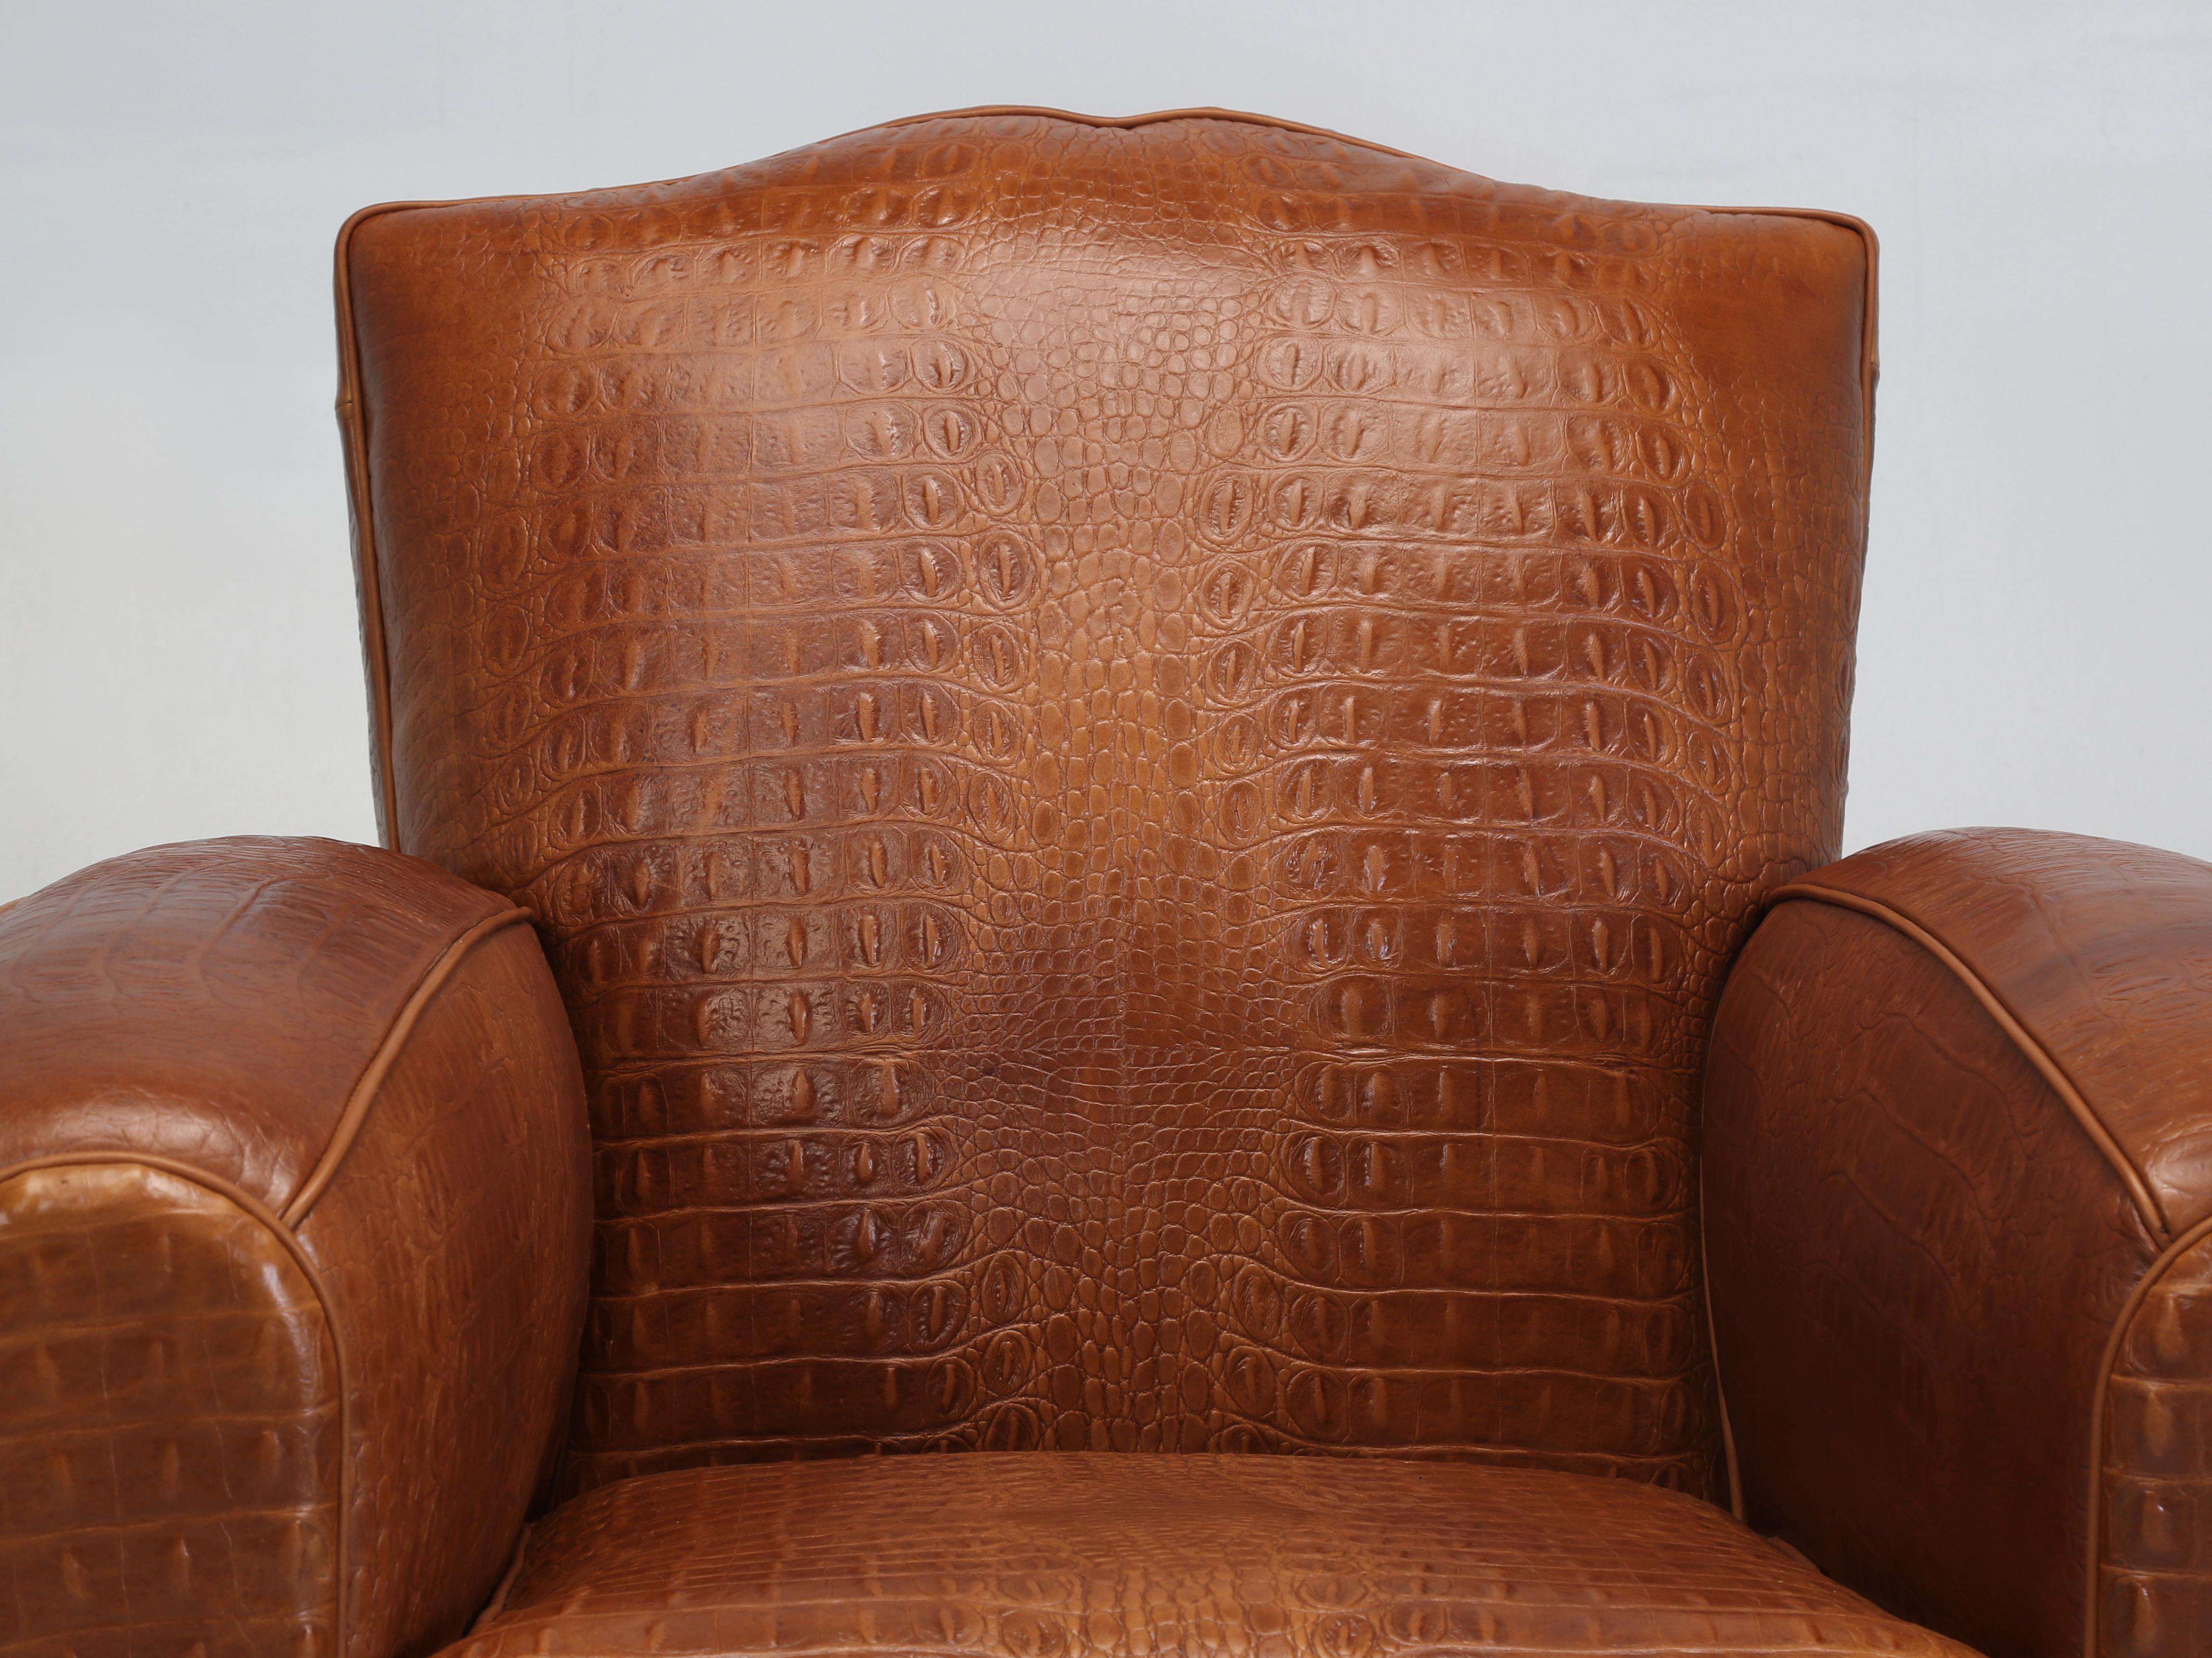 French Art Deco Moustache Style Leather Club Chair Upholstered in a Gorgeous Cognac Colored Faux Crocodile Real Leather imported from Italy and surprisingly soft for an embossed leather. We were inspired by our Original Crocodile 1920’s Club Chair,